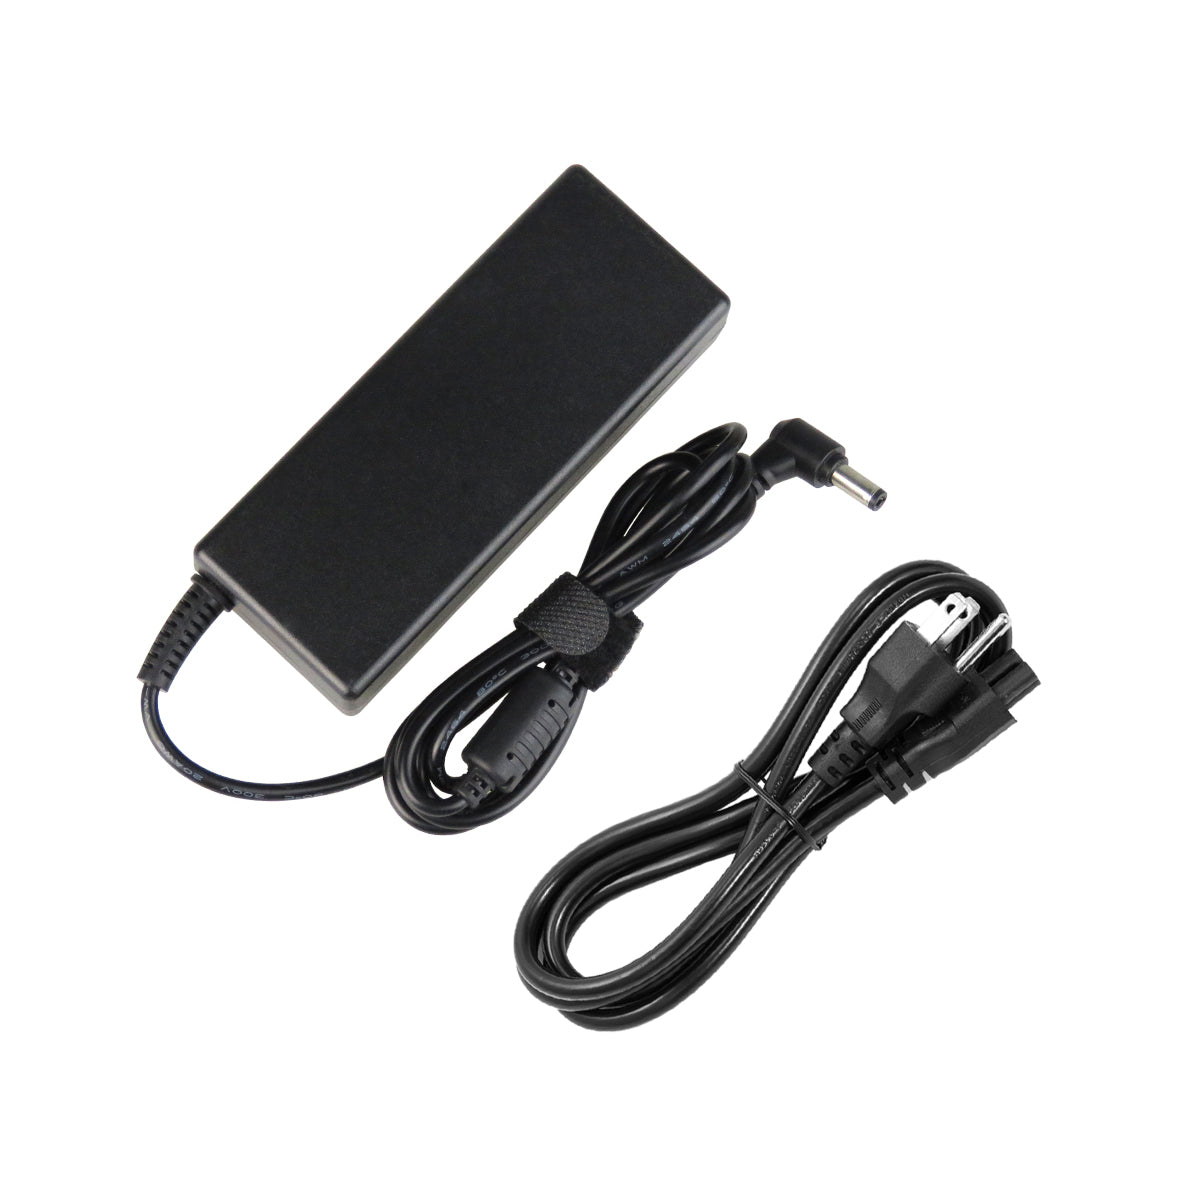 AC Adapter Charger for Gateway M-2600 Notebook.